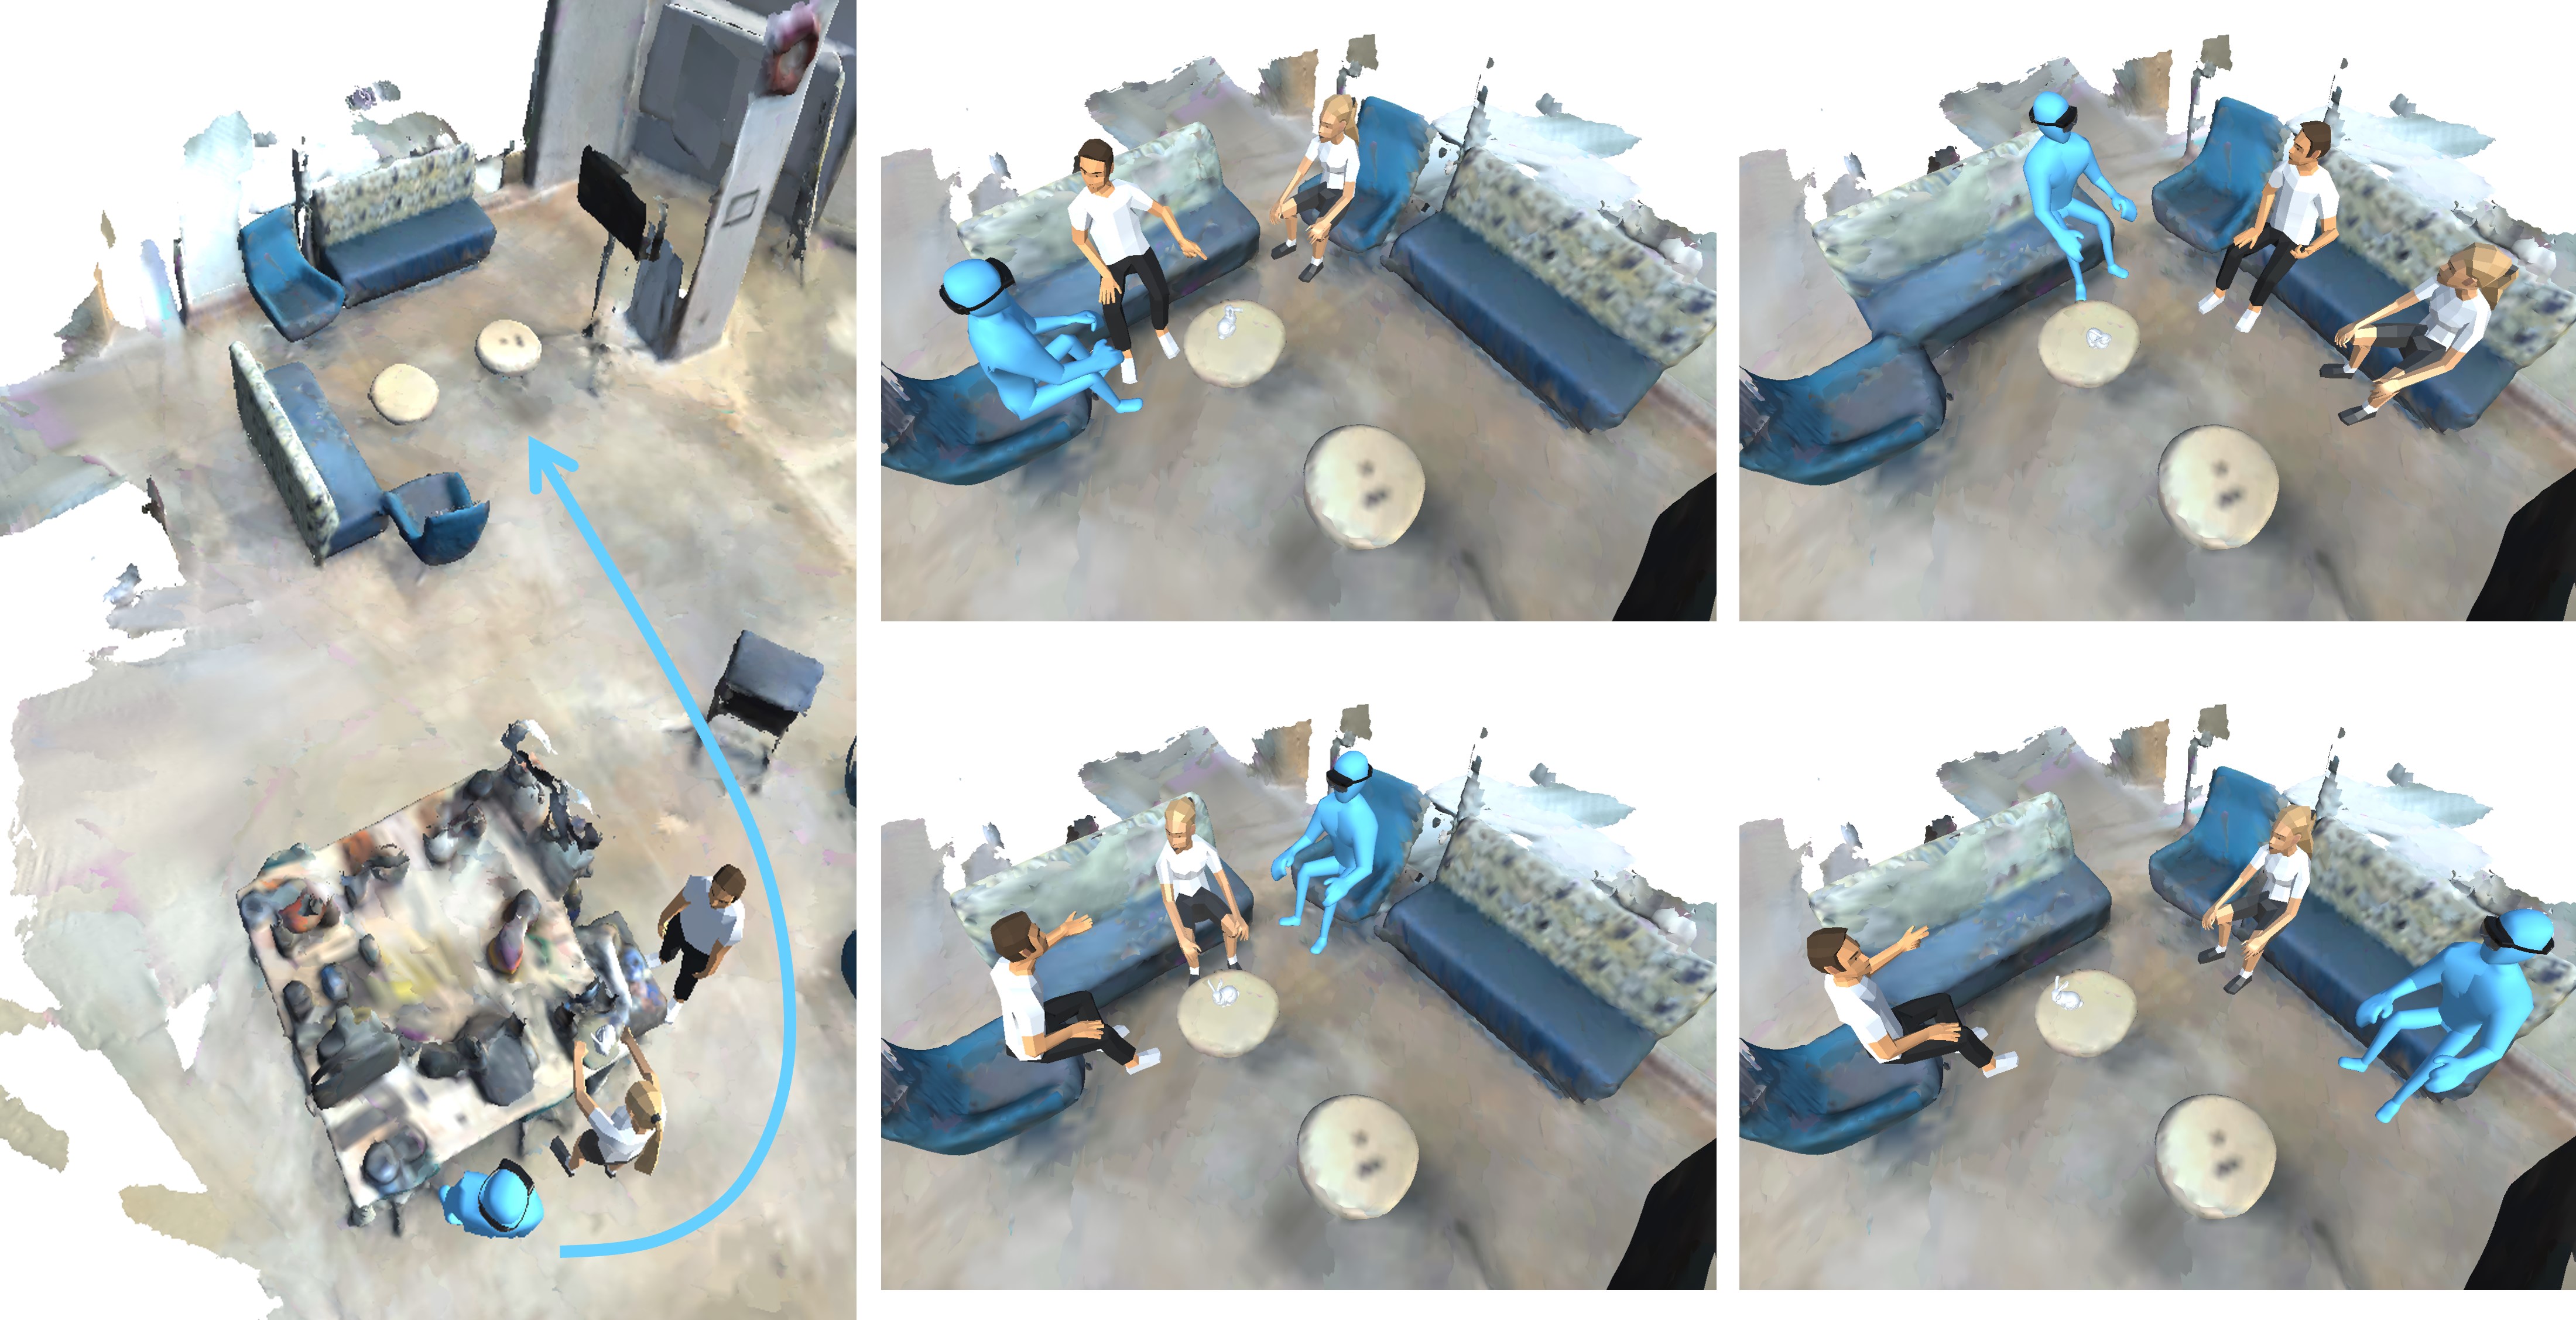 The virtual character's behaviors are adaptive to the action of the AR player (denoted by the blue avatar).